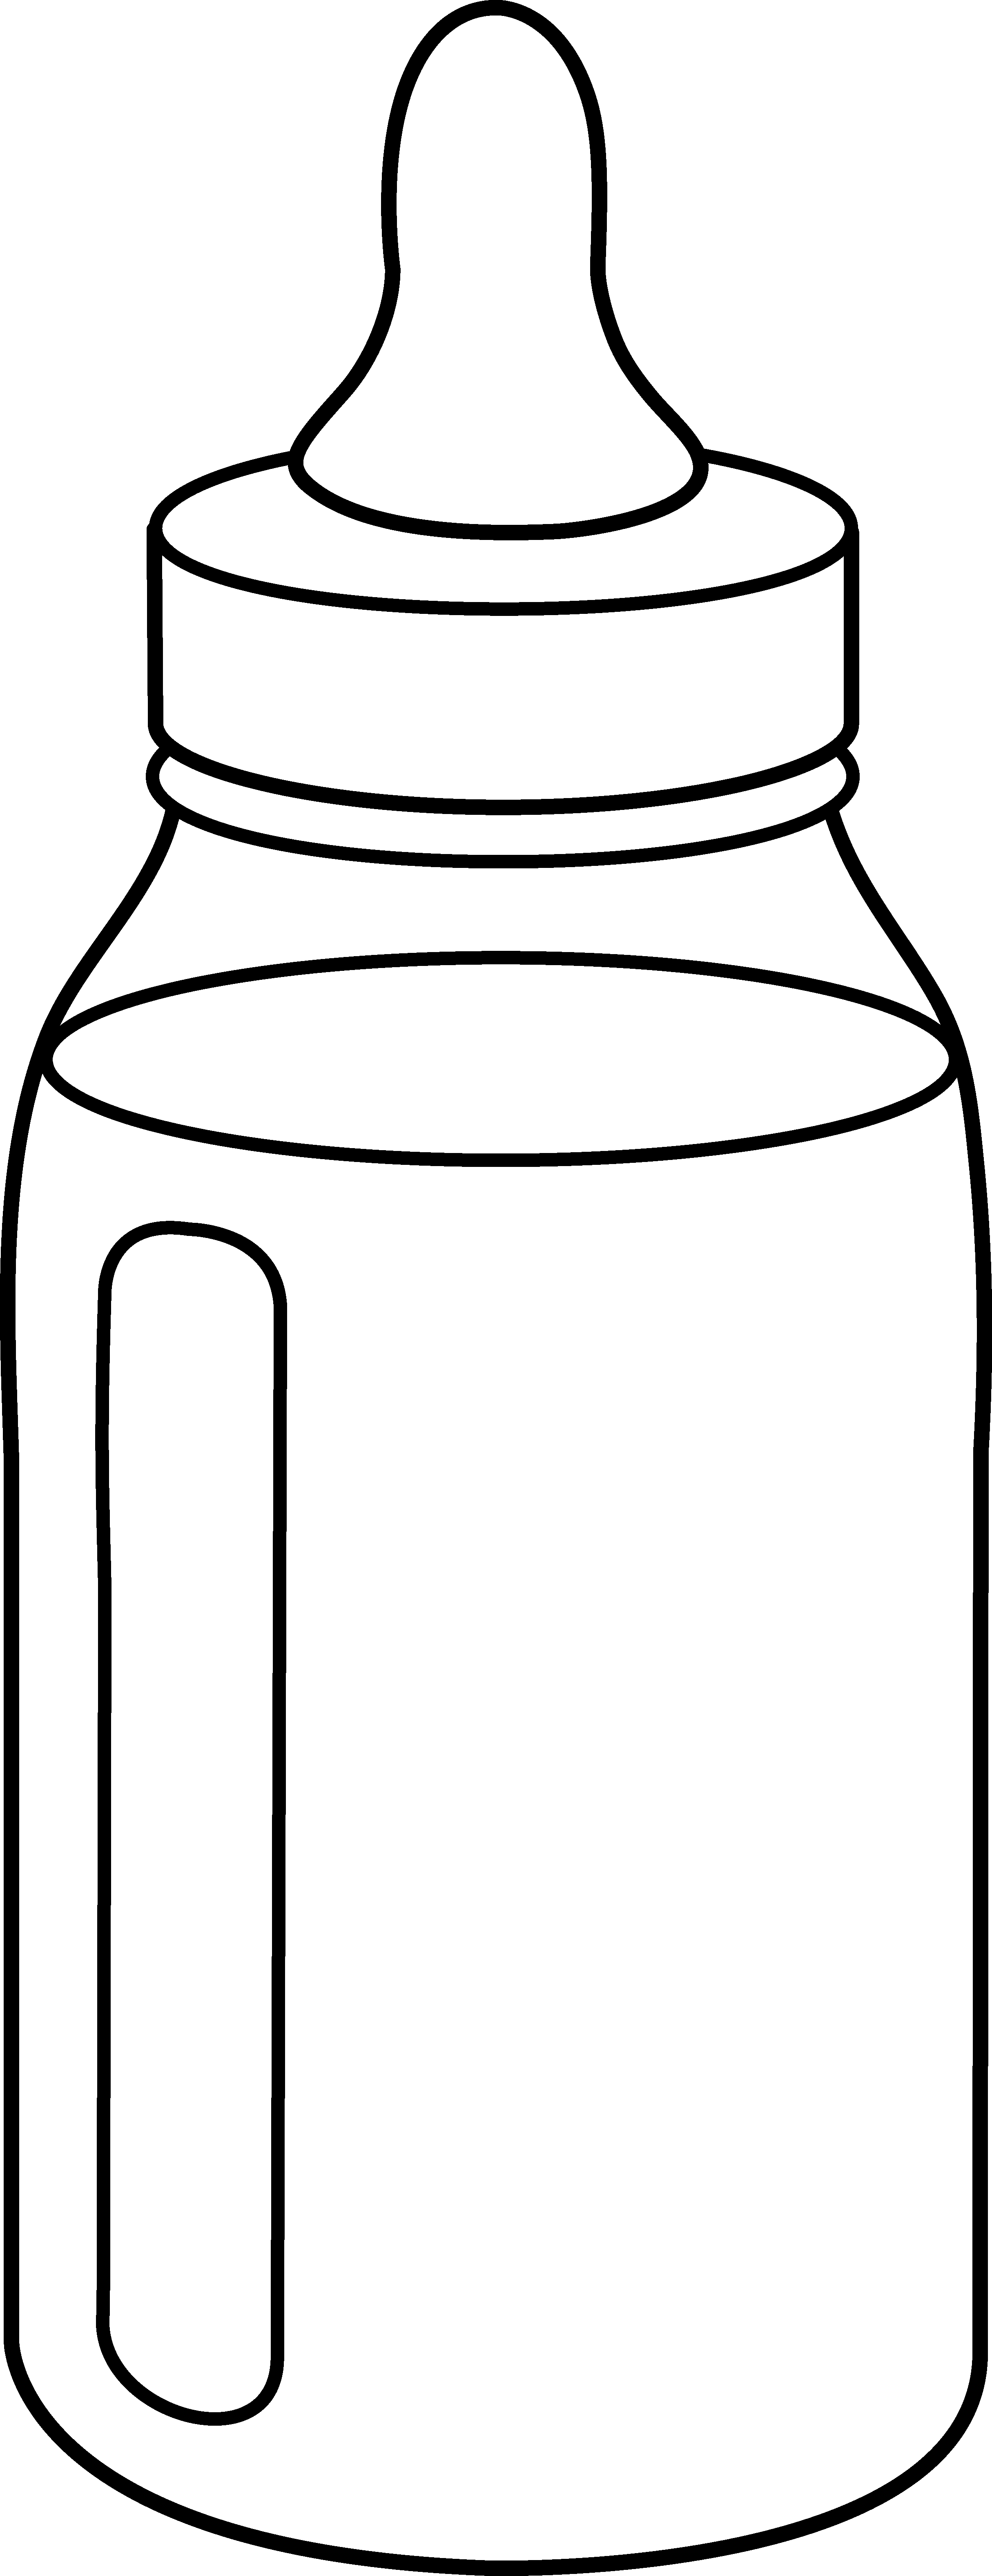 Baby Bottle Outline Drawing Images & Pictures - Becuo